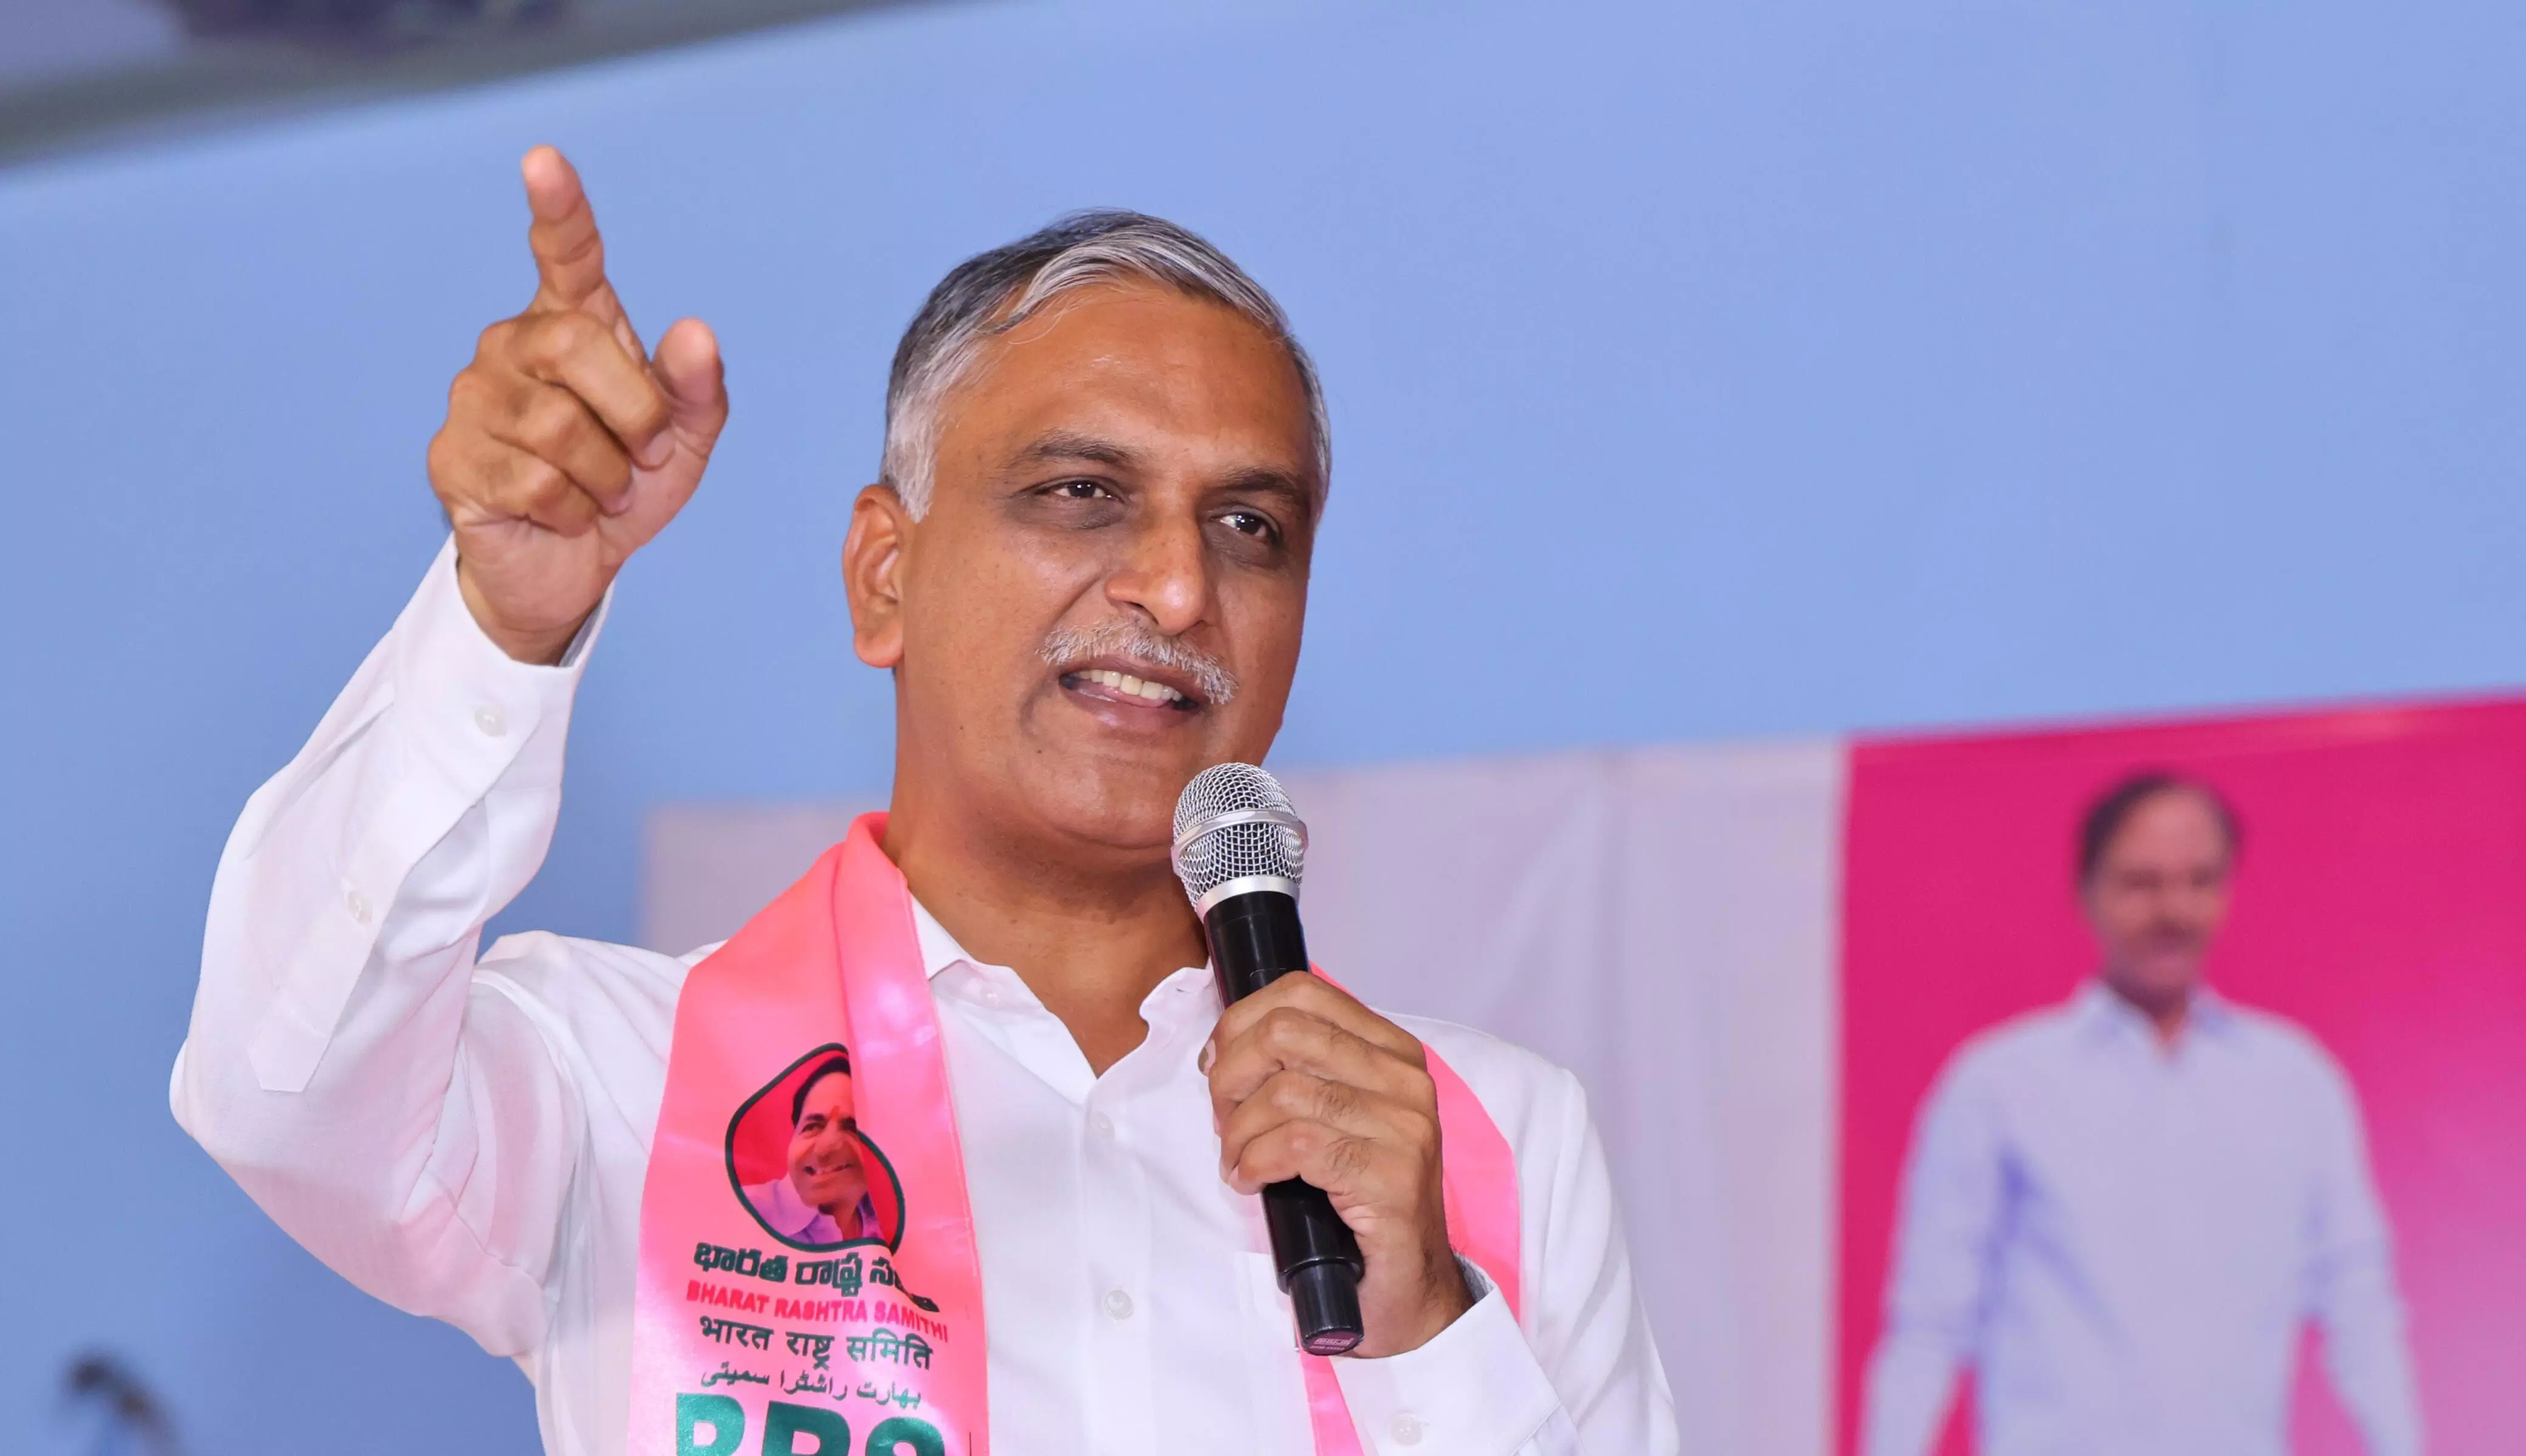 Harish Rao criticises Revanth Reddy for delay in Rs 2 lakh farm loan waiver implementation